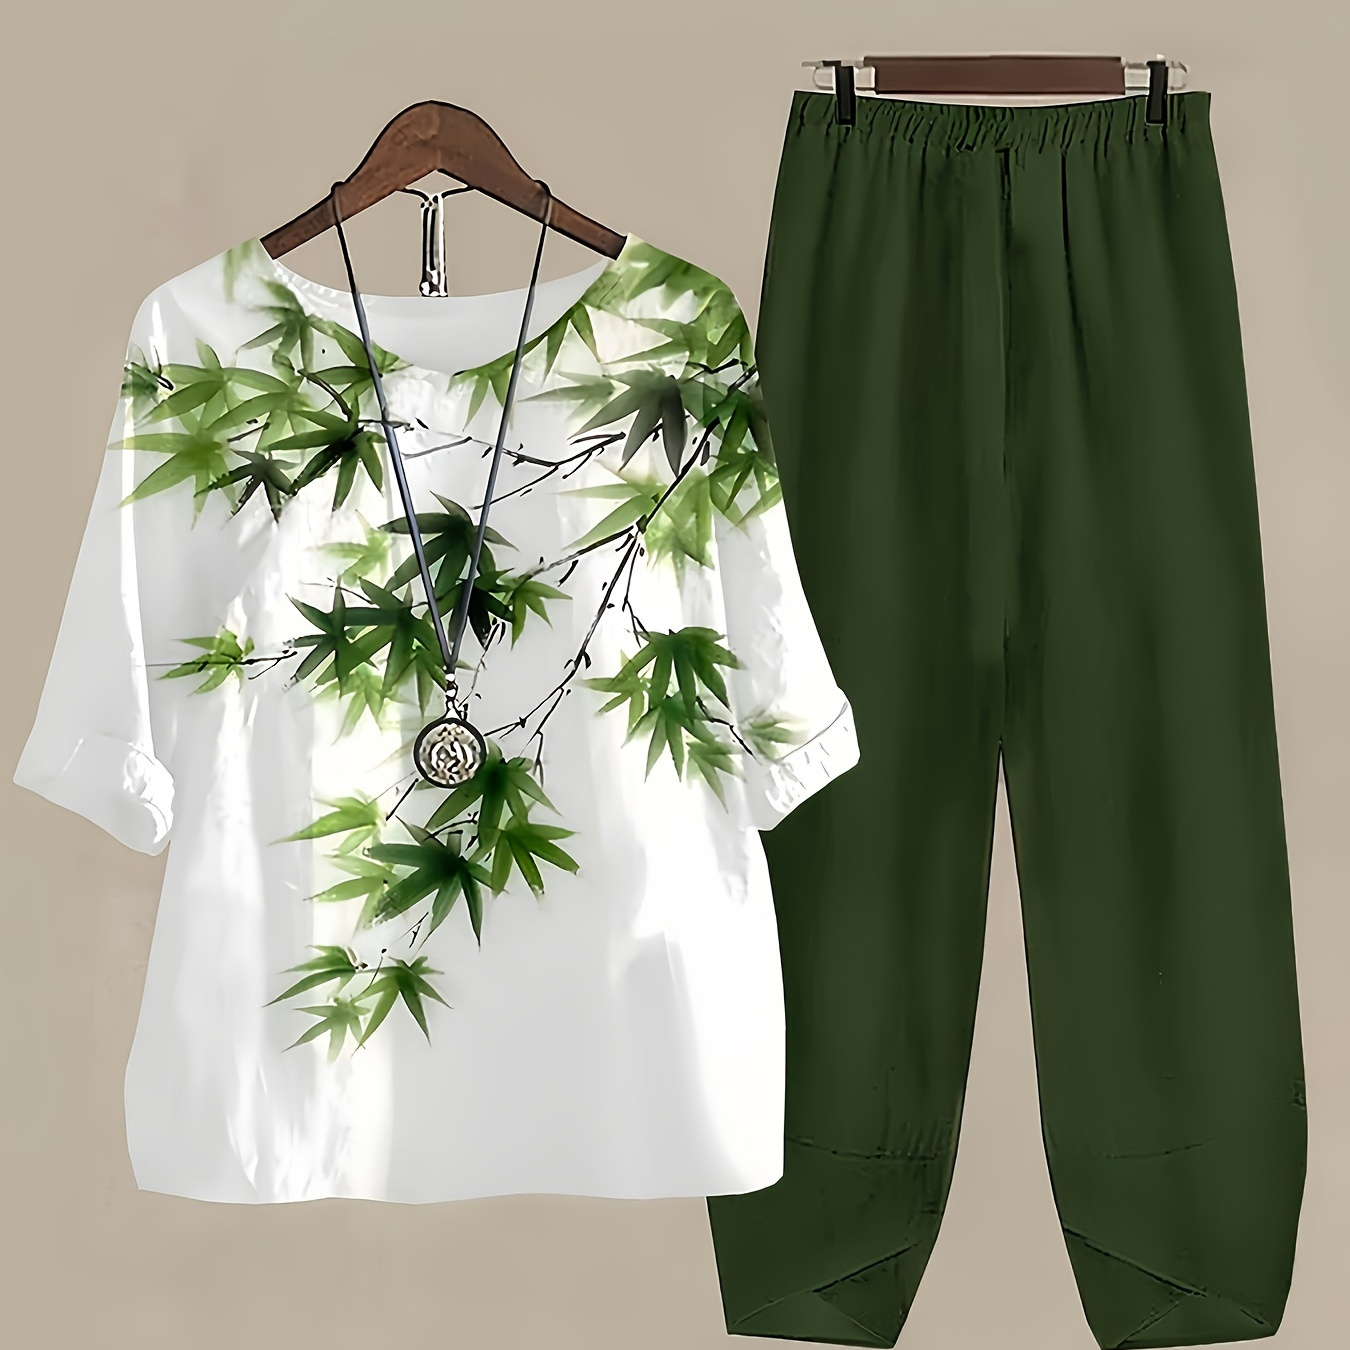 

Bamboo Print Two-piece Set, Casual Short Sleeve T-shirt & Fitted Bottom Pants Outfits, Women's Clothing